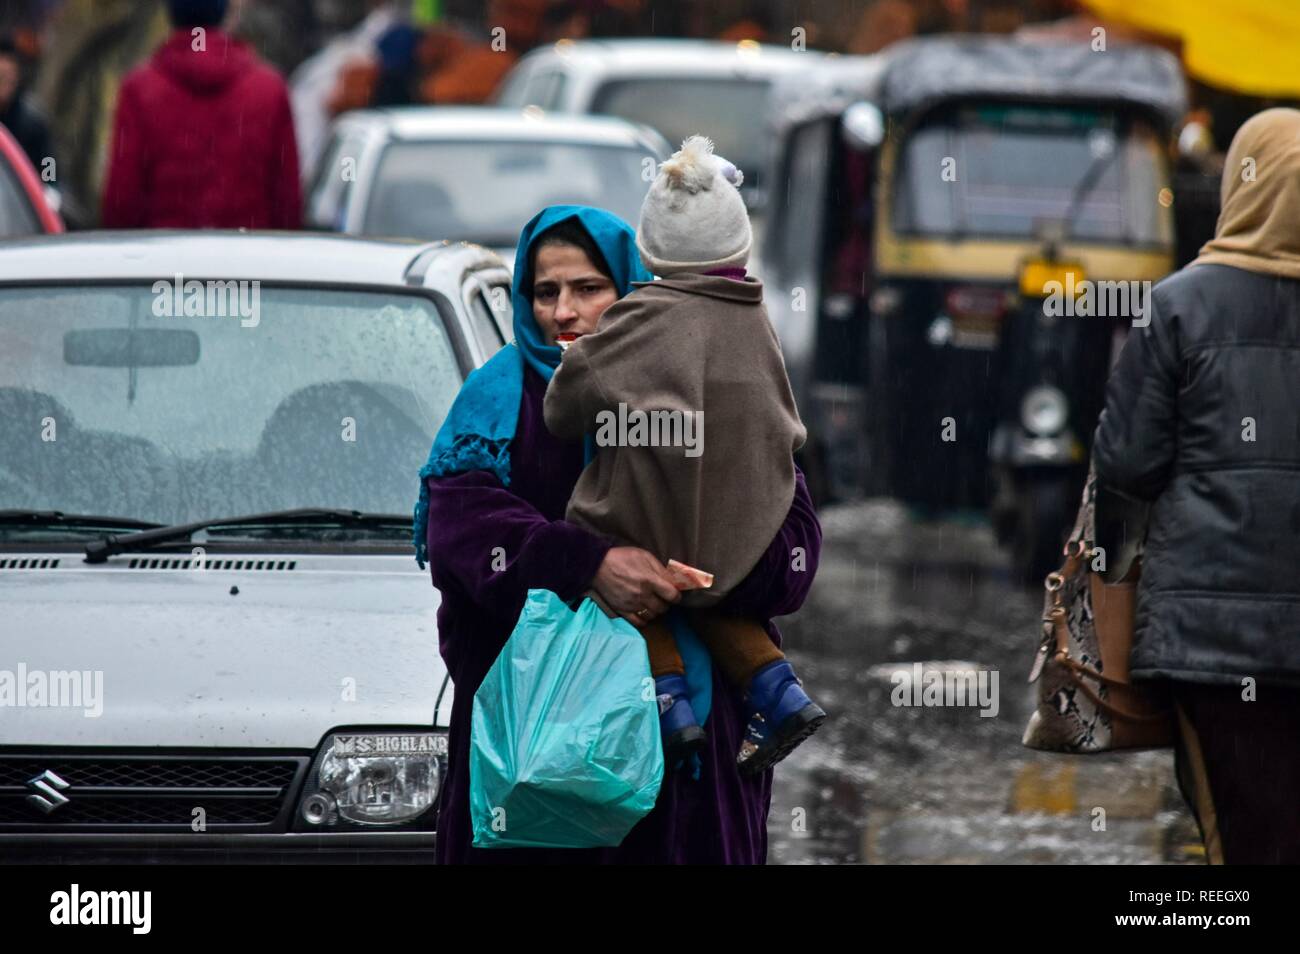 A woman carries her child as she walks through a street during rainfall in Srinagar, Indian administered Kashmir. The upper reaches on Monday received fresh snowfall, while rains lashed Srinagar, and other parts of the Kashmir valley. The weather man has forecast moderate to heavy rain and snowfall over the state during the next 24 hours. Stock Photo